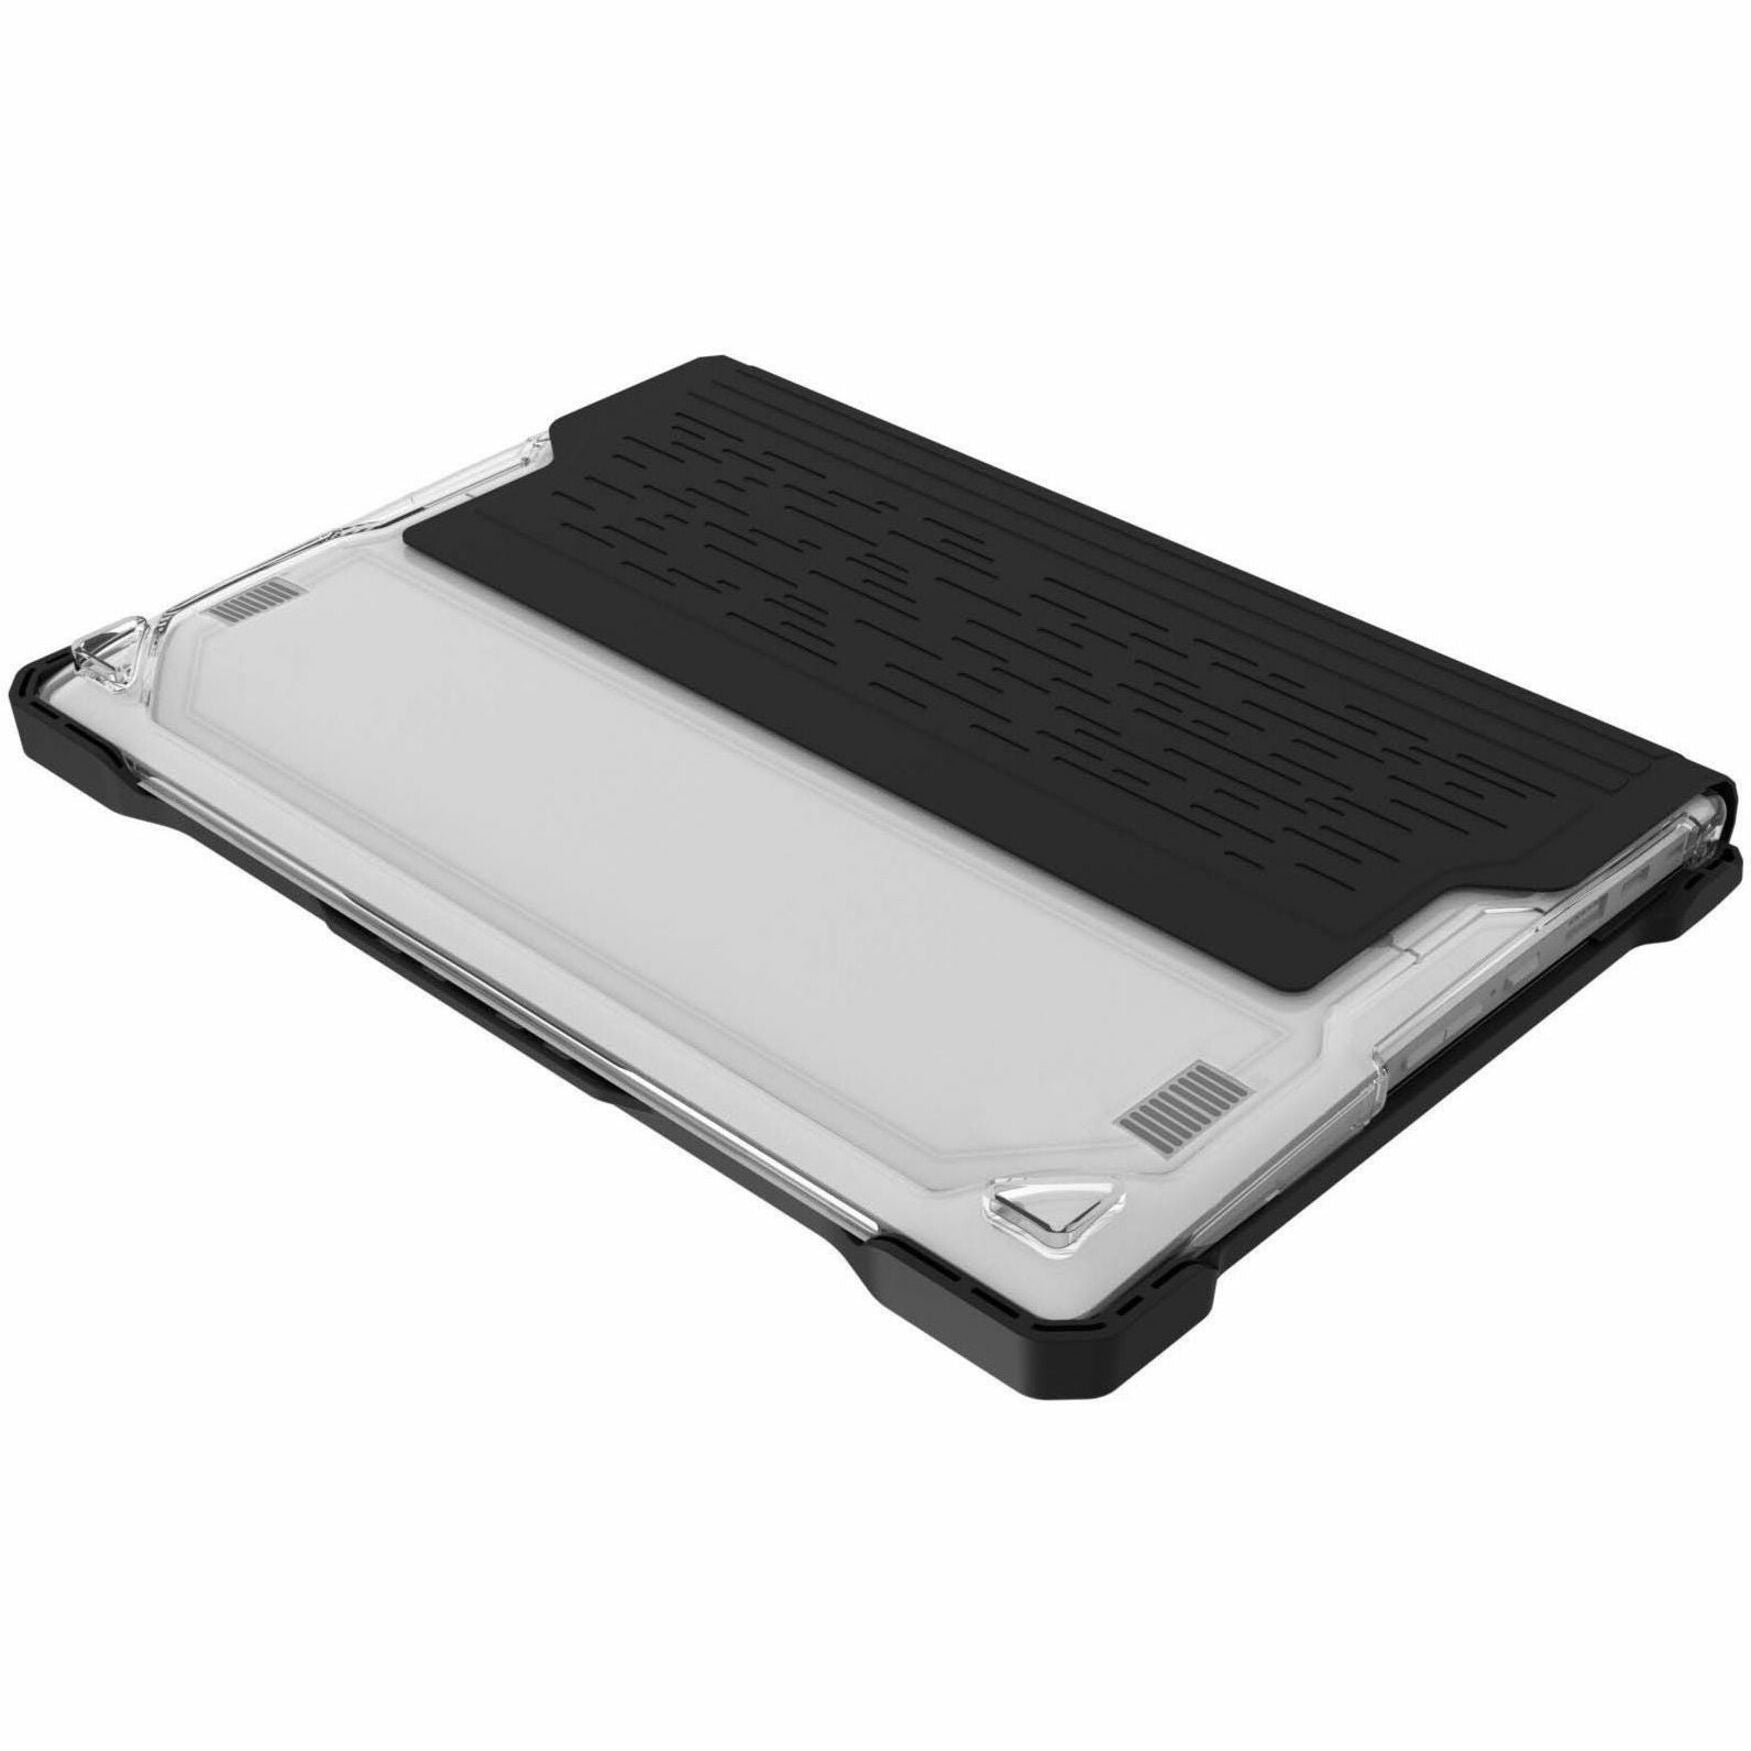 Maxcases Extreme Shell-L for Dell 3100 Chromebook 2:1 Convertible 11.6 Black/Clear